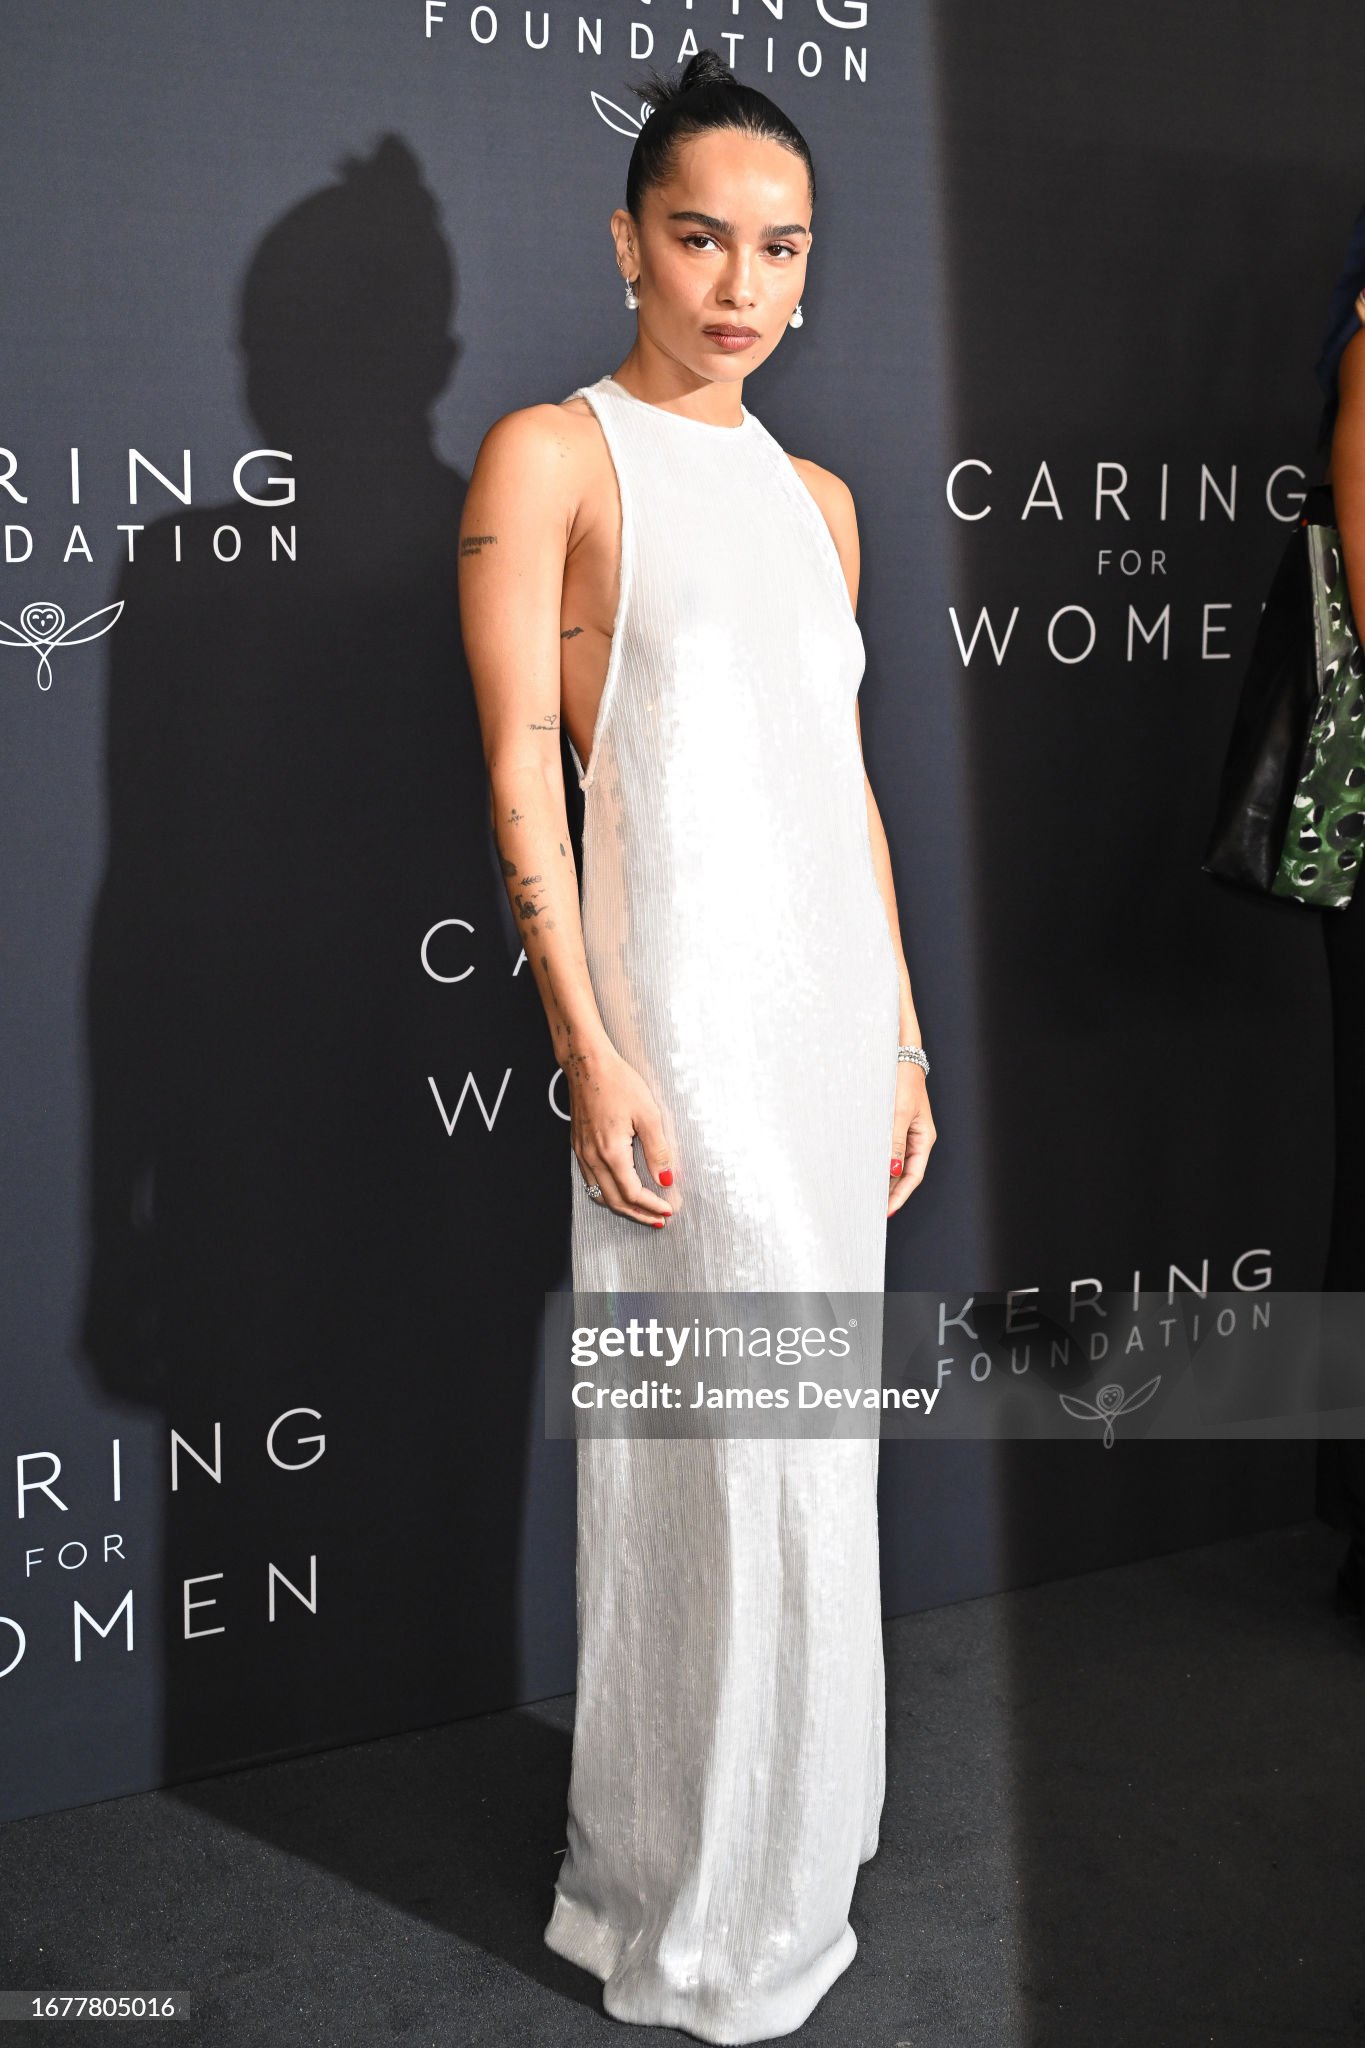 Zoe Kravitz - attends Kering's 2nd Annual Caring For Women Dinner in HQ